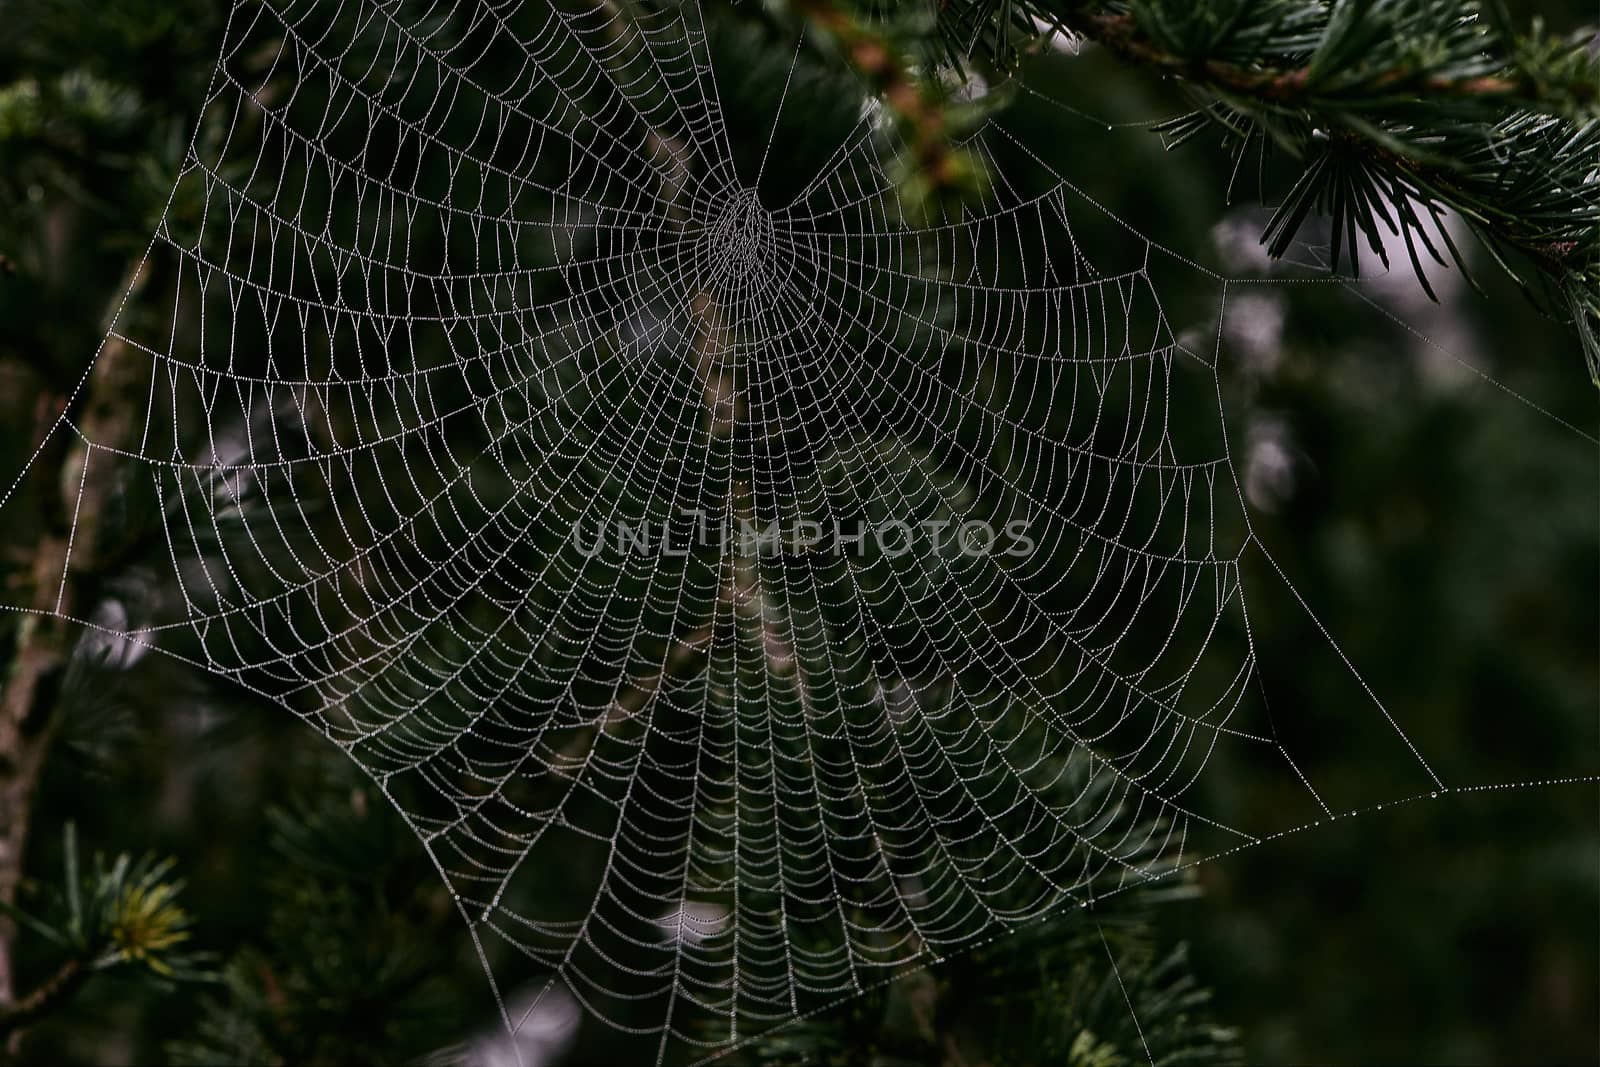 Spider webs between the branches of the trees covered with morning dew drops. Morning dew covering the vegetation. Image of nature and garden.